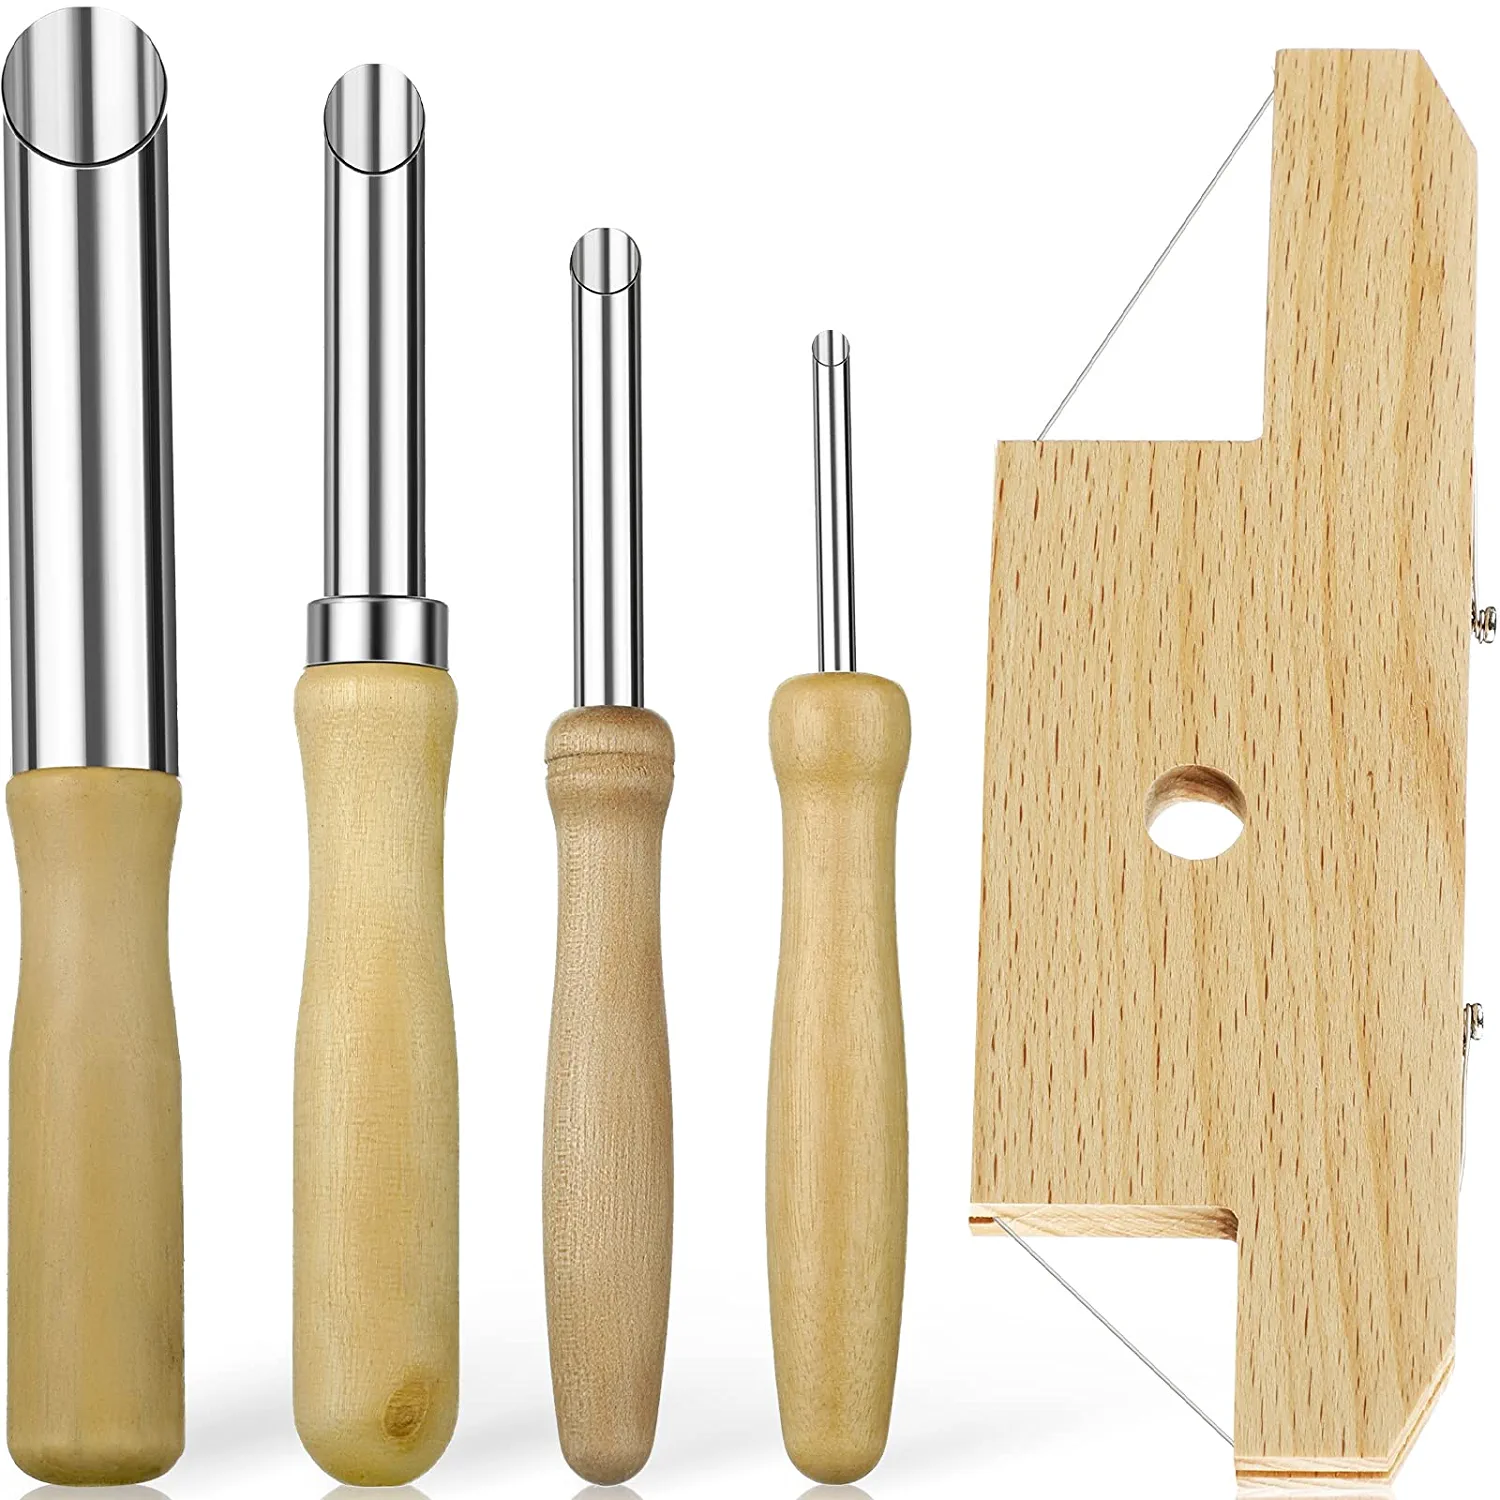 5 Pcs Pottery Clay Tools Set Includes Wood And Wire Bevel Cutter And 4 Pcs Circu - £15.71 GBP